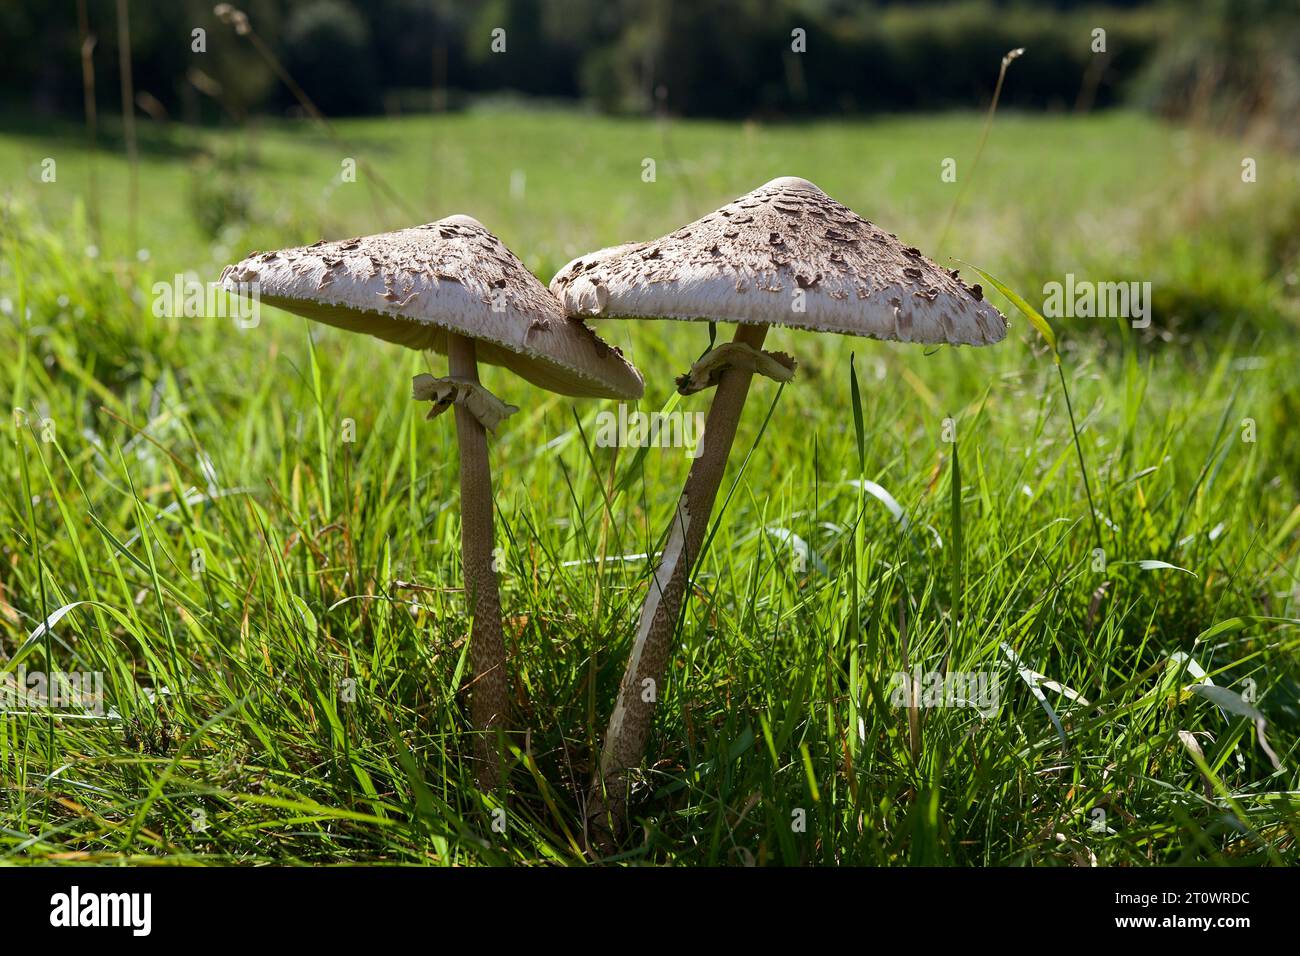 The Parasol Mushroom, Macrolepiota procera, considered a good edible mushroom, but care should be taken not to confuse with other similar species Stock Photo